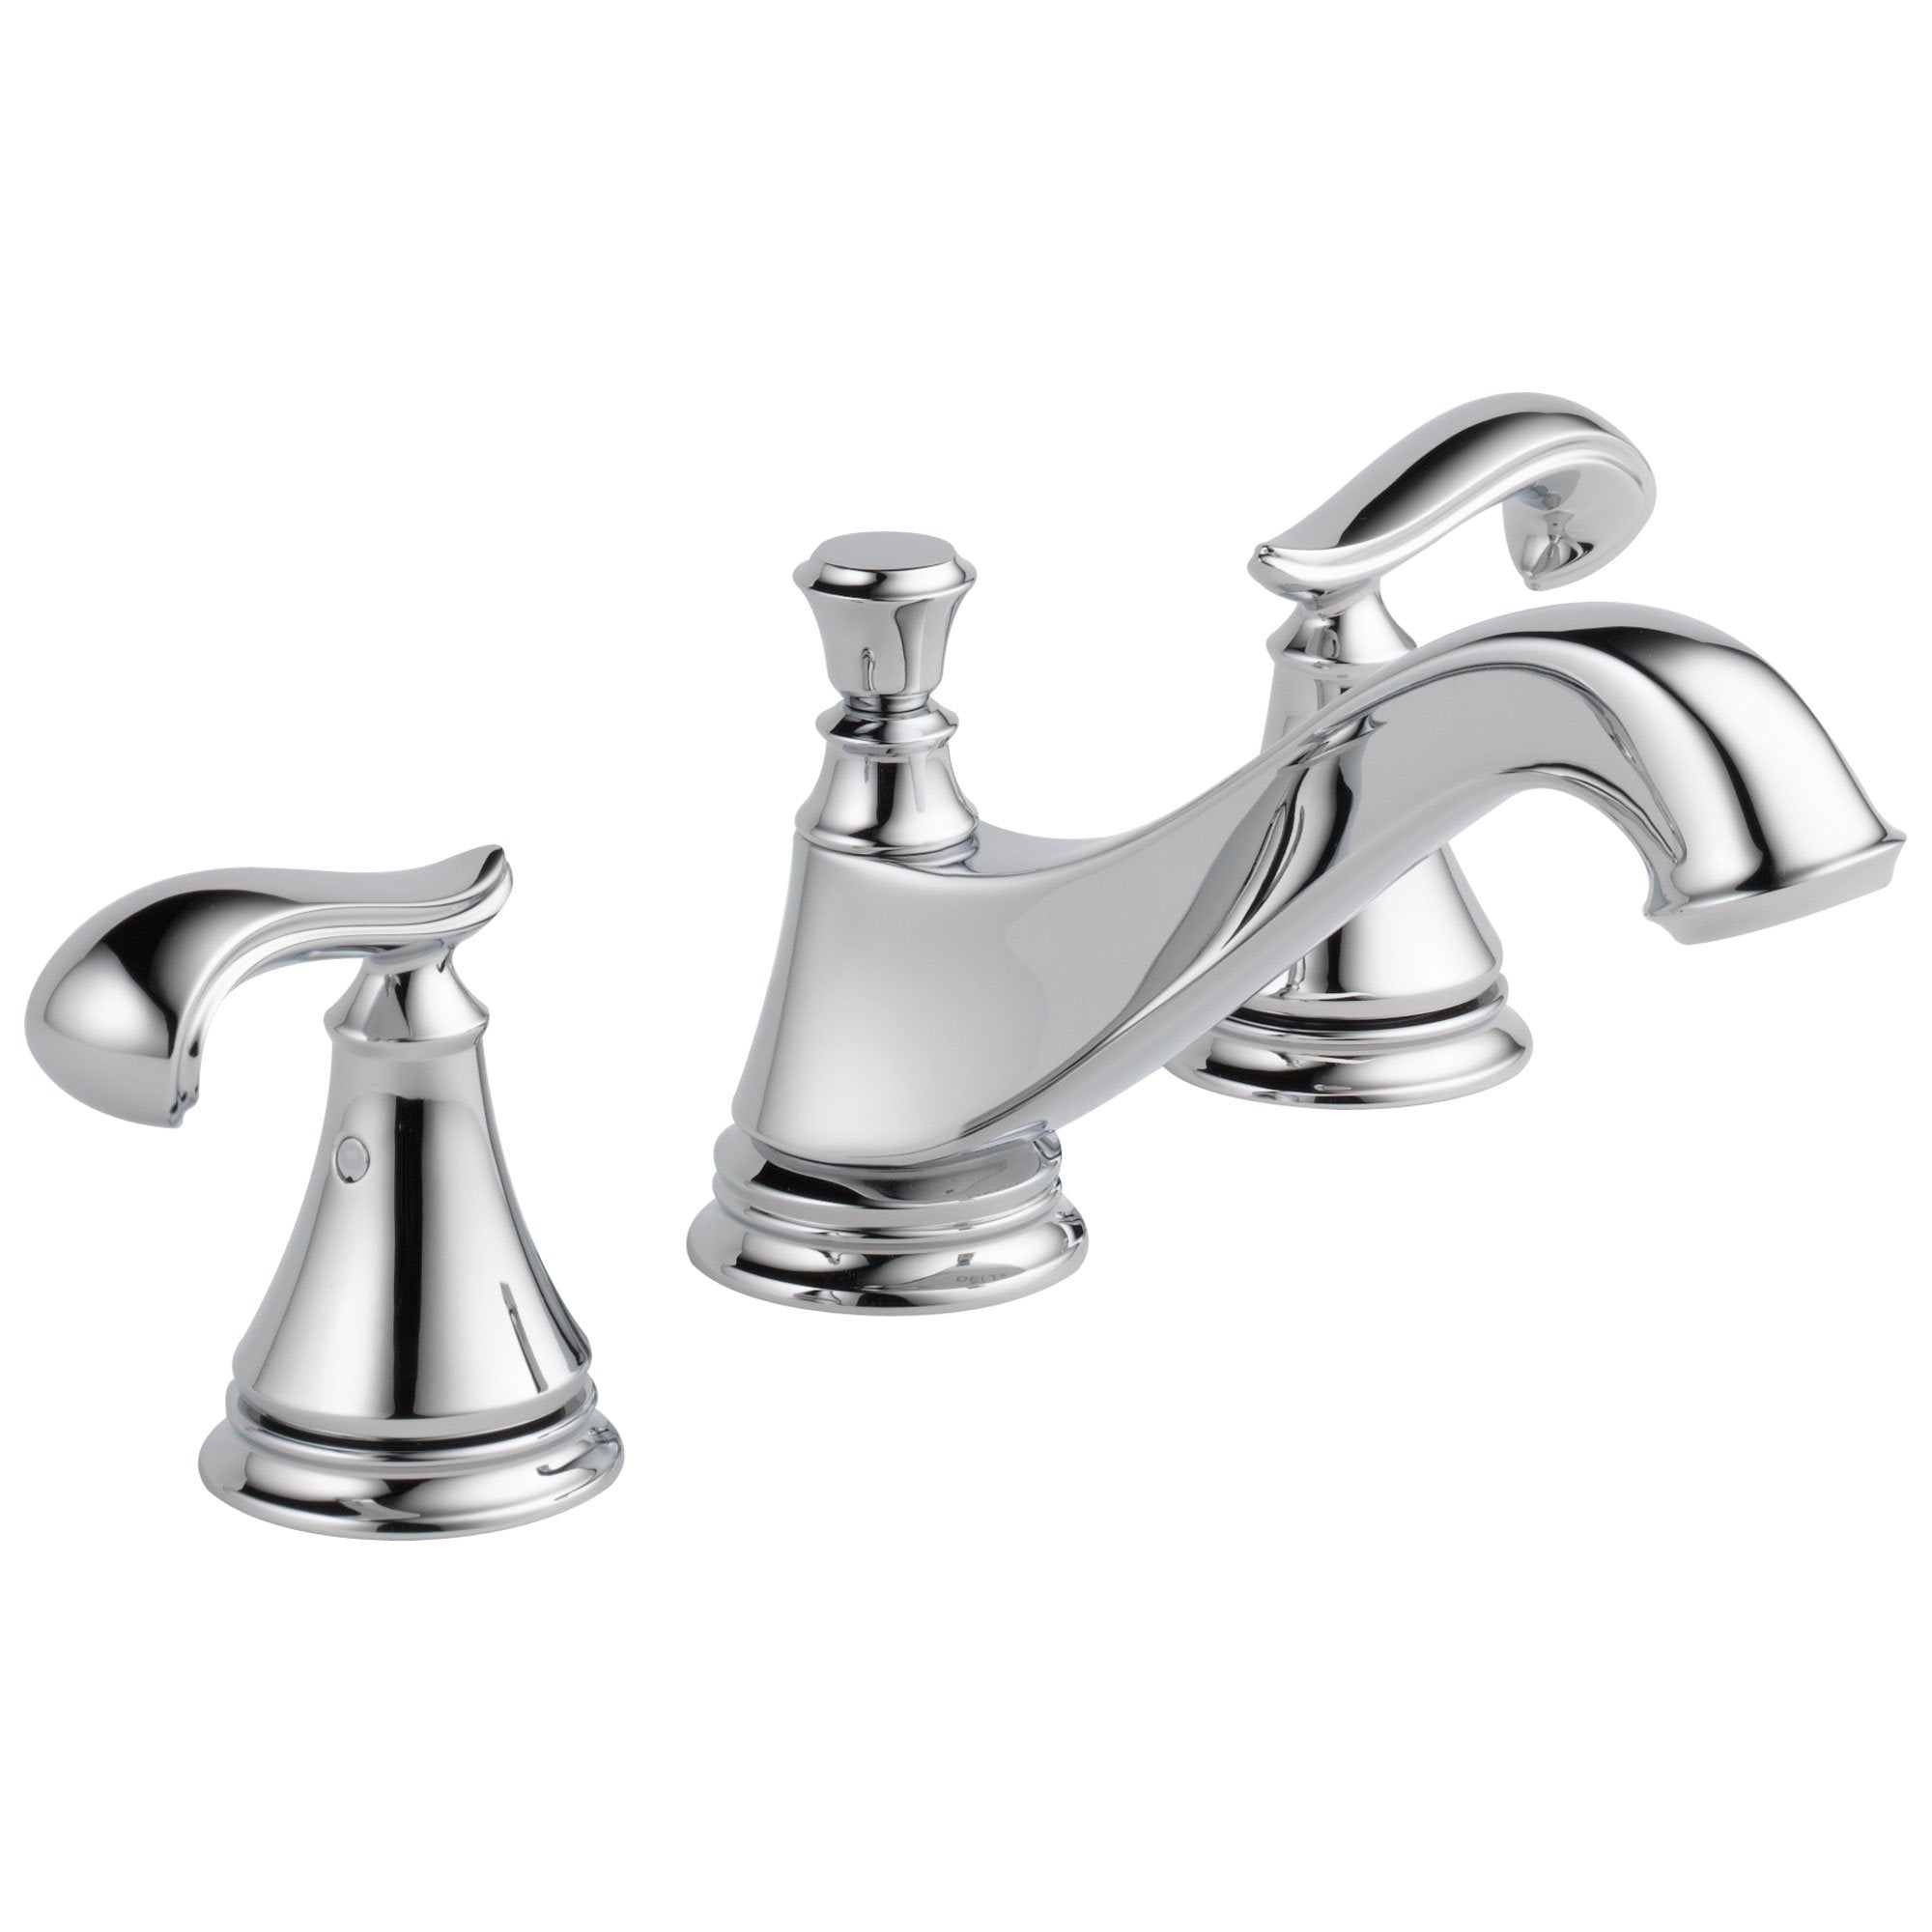 Delta Cassidy Collection Chrome Finish Traditional Low Spout Widespread Bathroom Sink Faucet INCLUDES Two French Curve Lever Handles and Drain D1797V